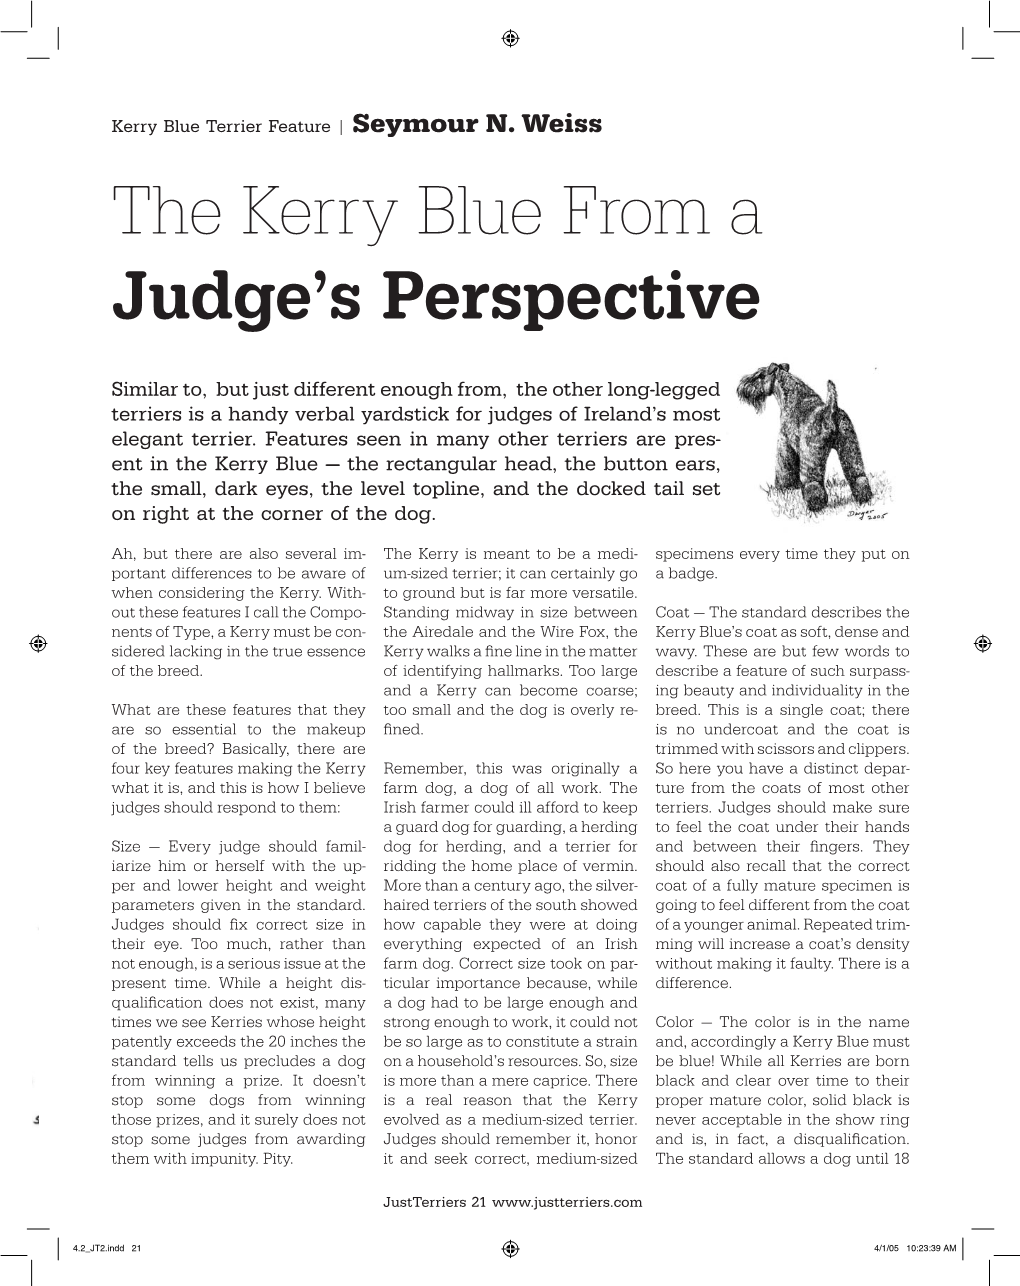 The Kerry Blue from a Judge's Perspective